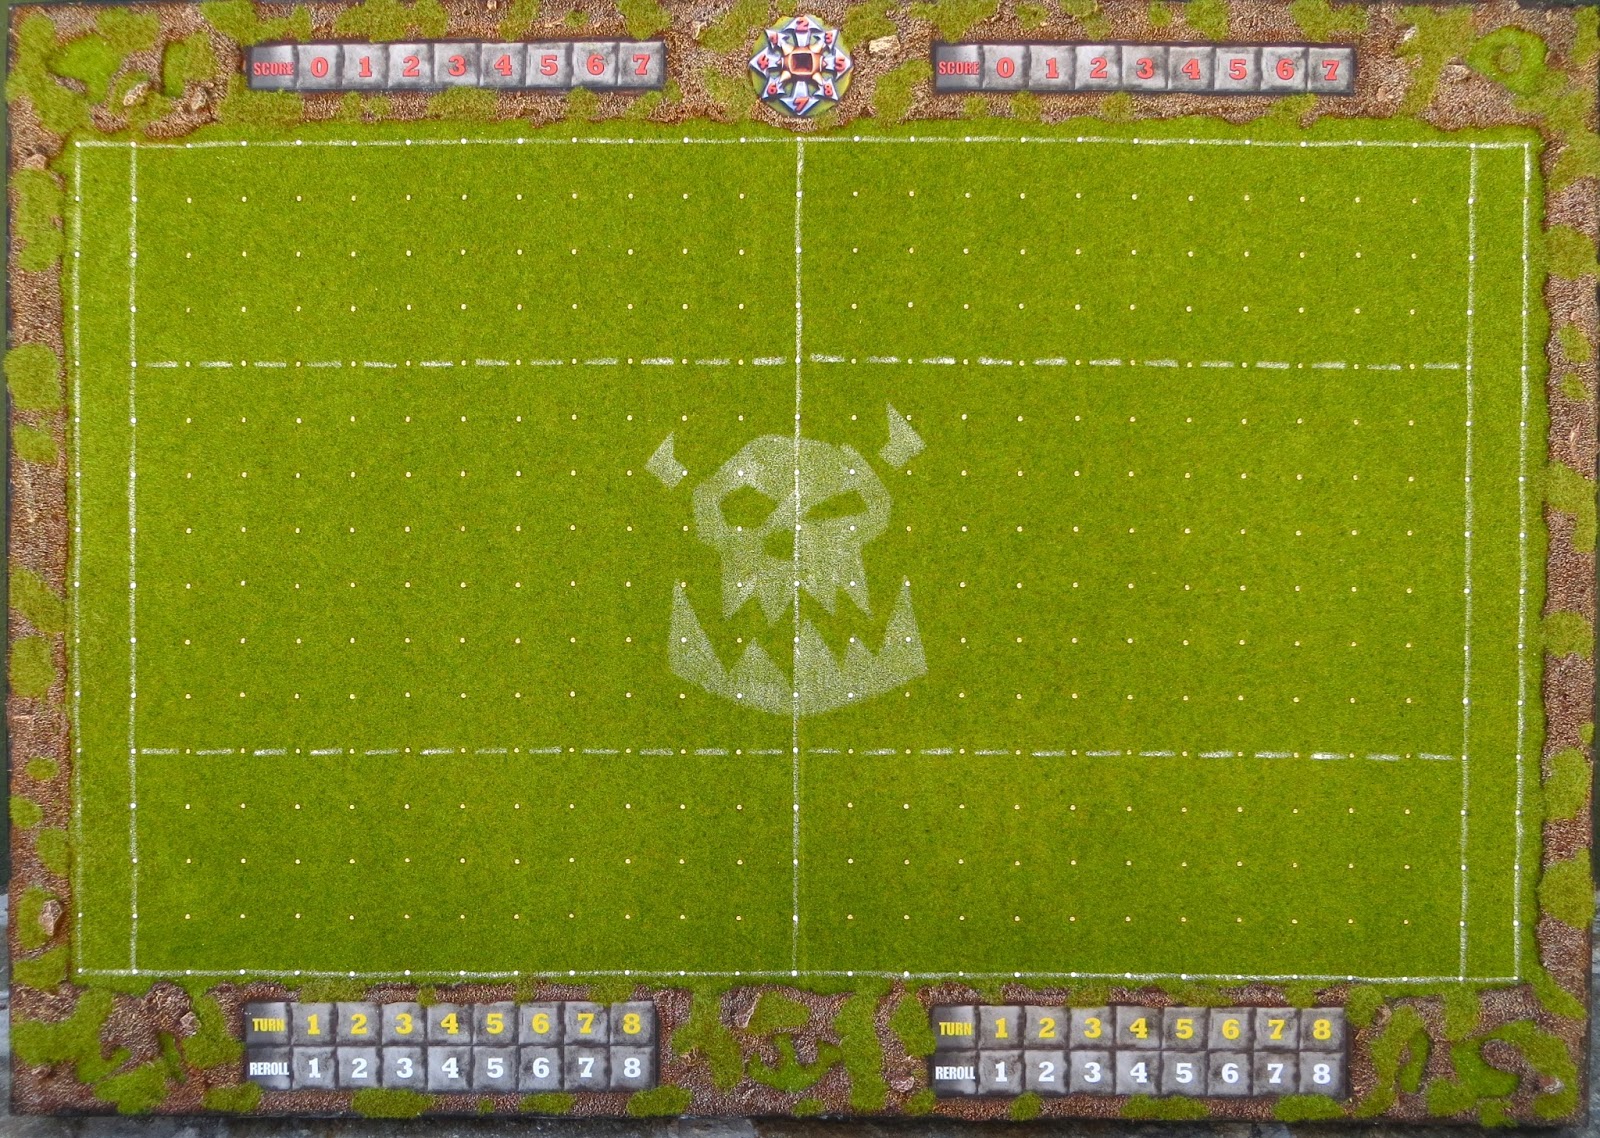 Painted static grass updated : r/bloodbowl